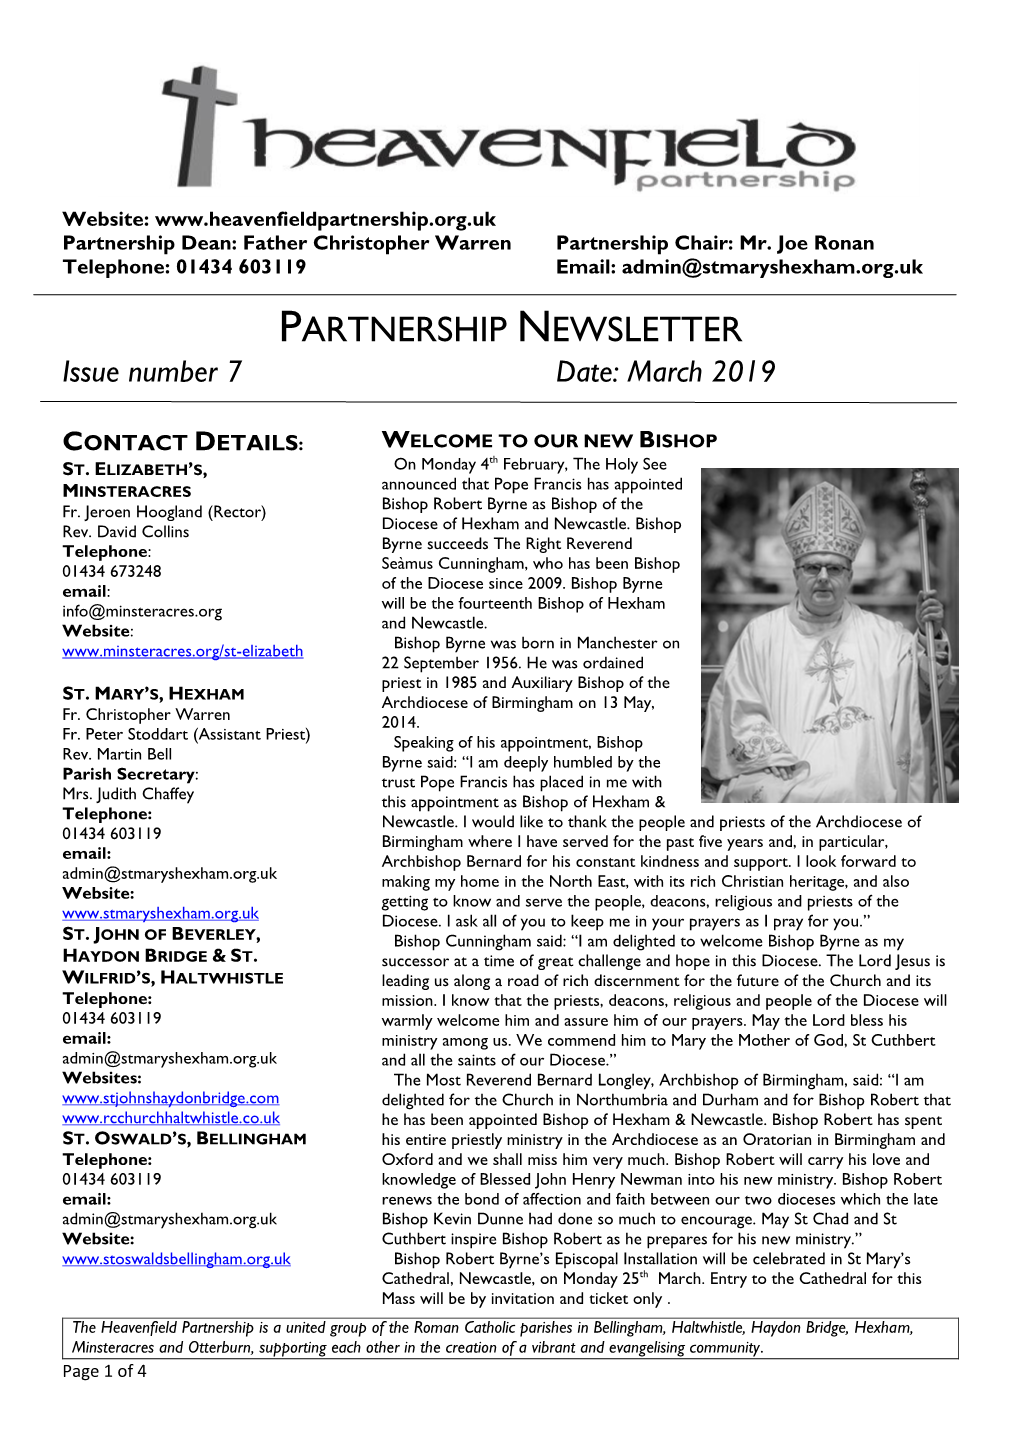 PARTNERSHIP NEWSLETTER Issue Number 7 Date: March 2019